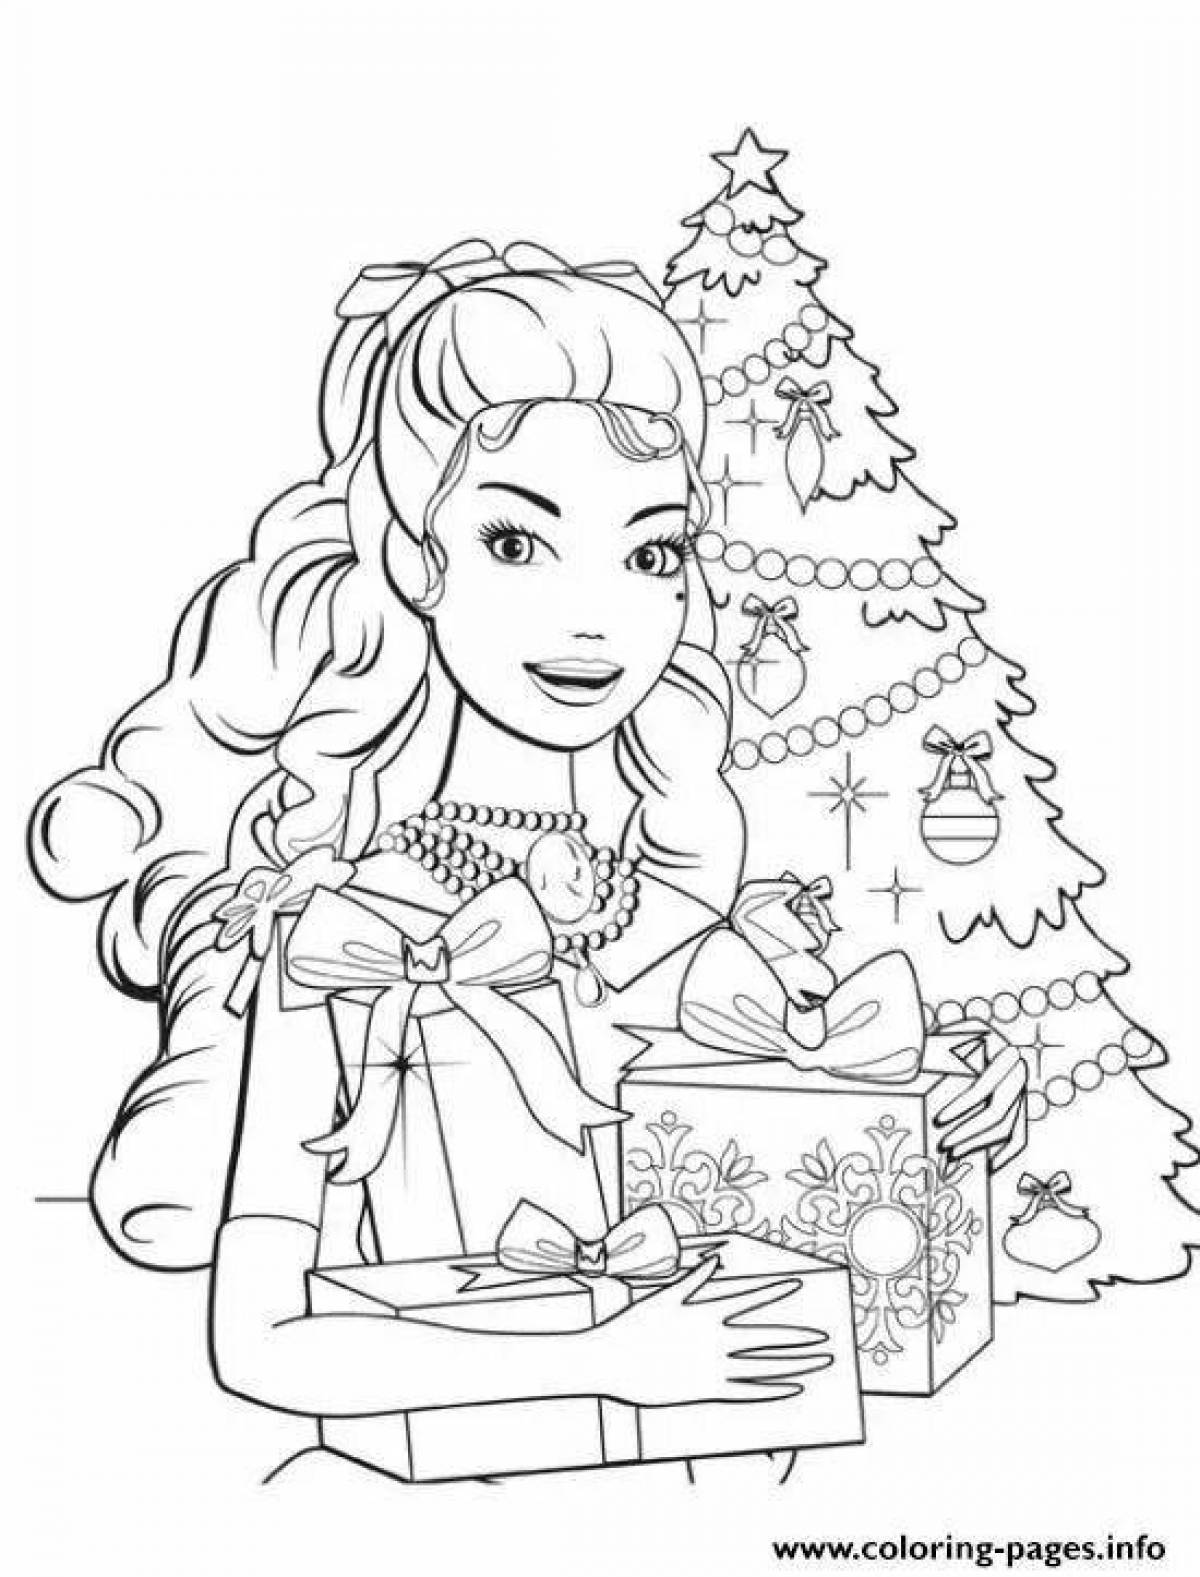 Shiny Christmas coloring book for girls